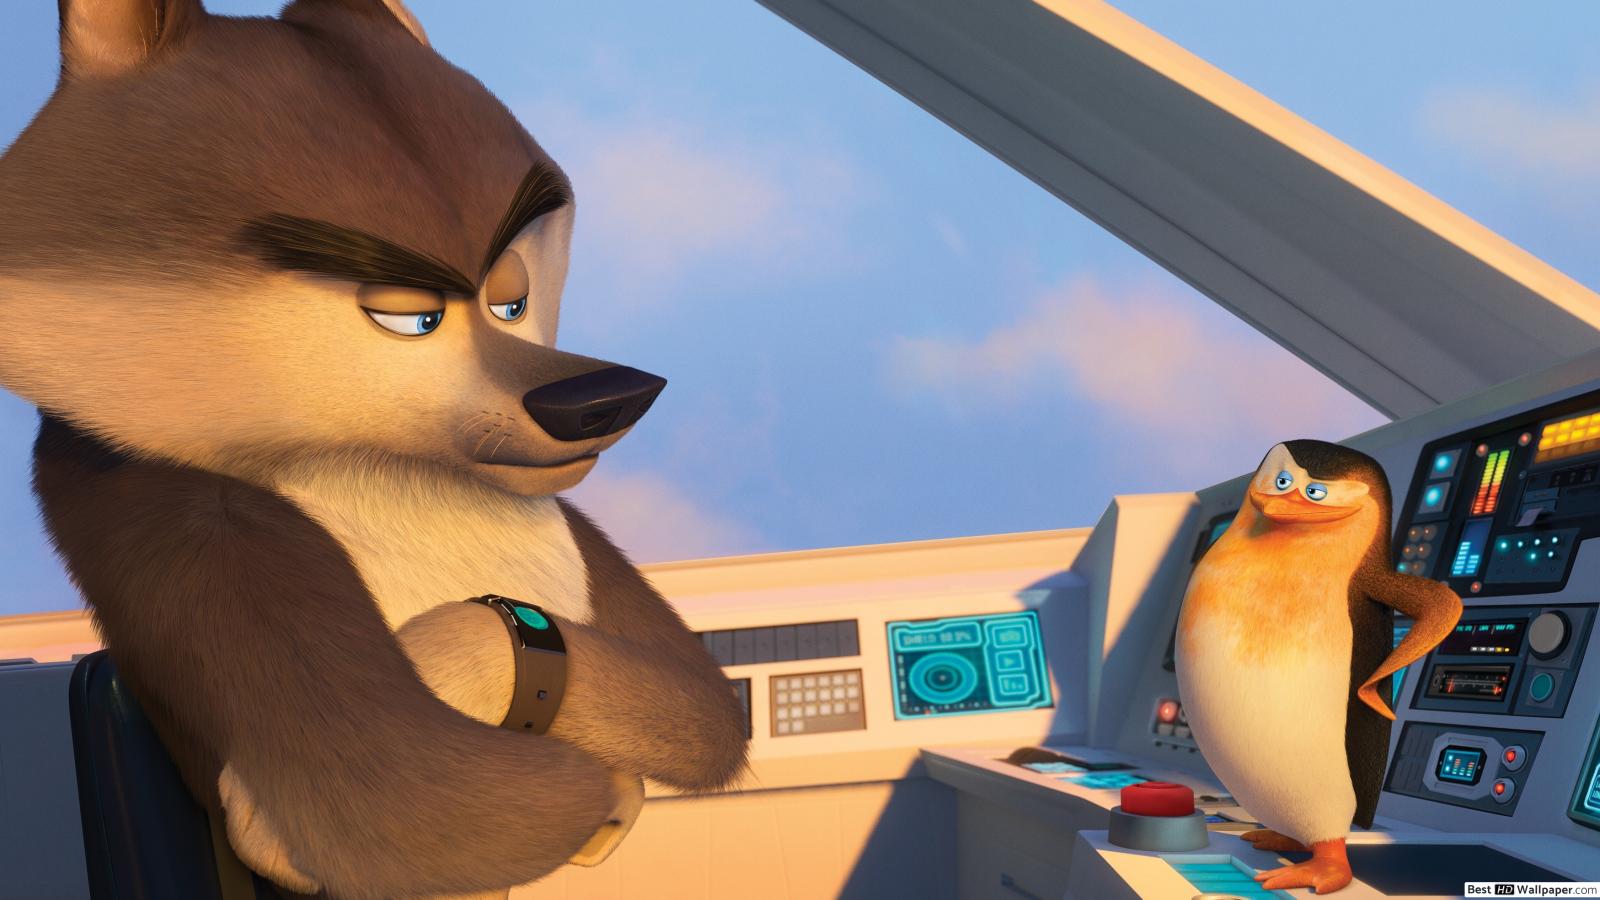 Penguins Of Madagascar The Wolf And Skipper HD Wallpaper